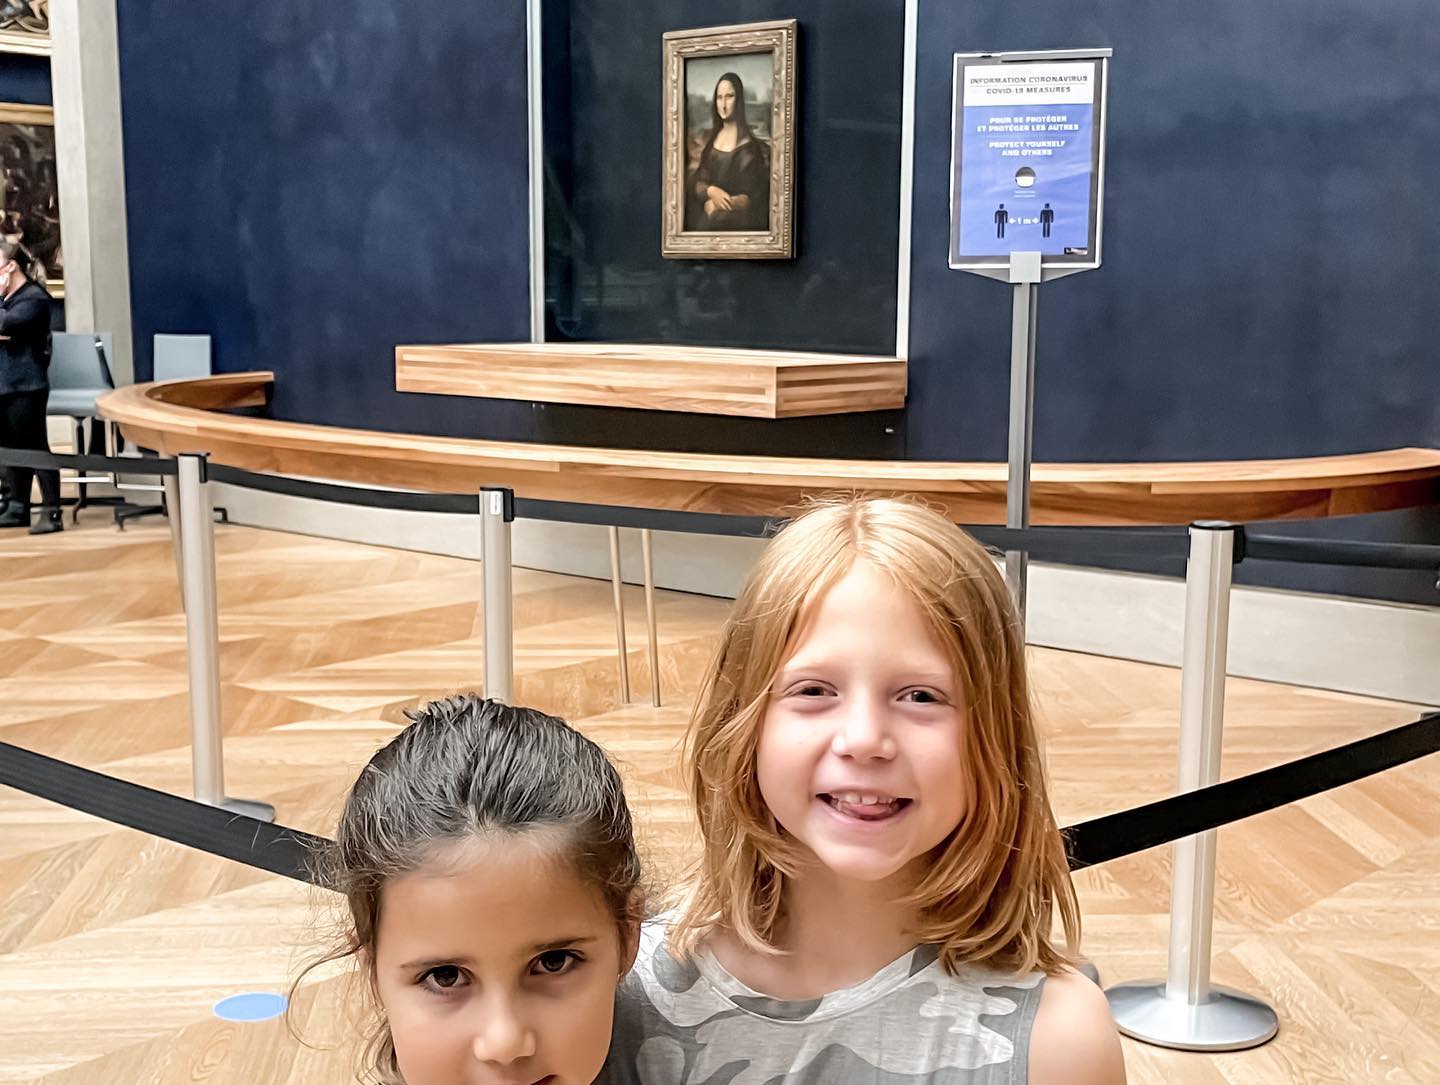 Mona Lisa at the Louvre - One Weekend in Paris with kids